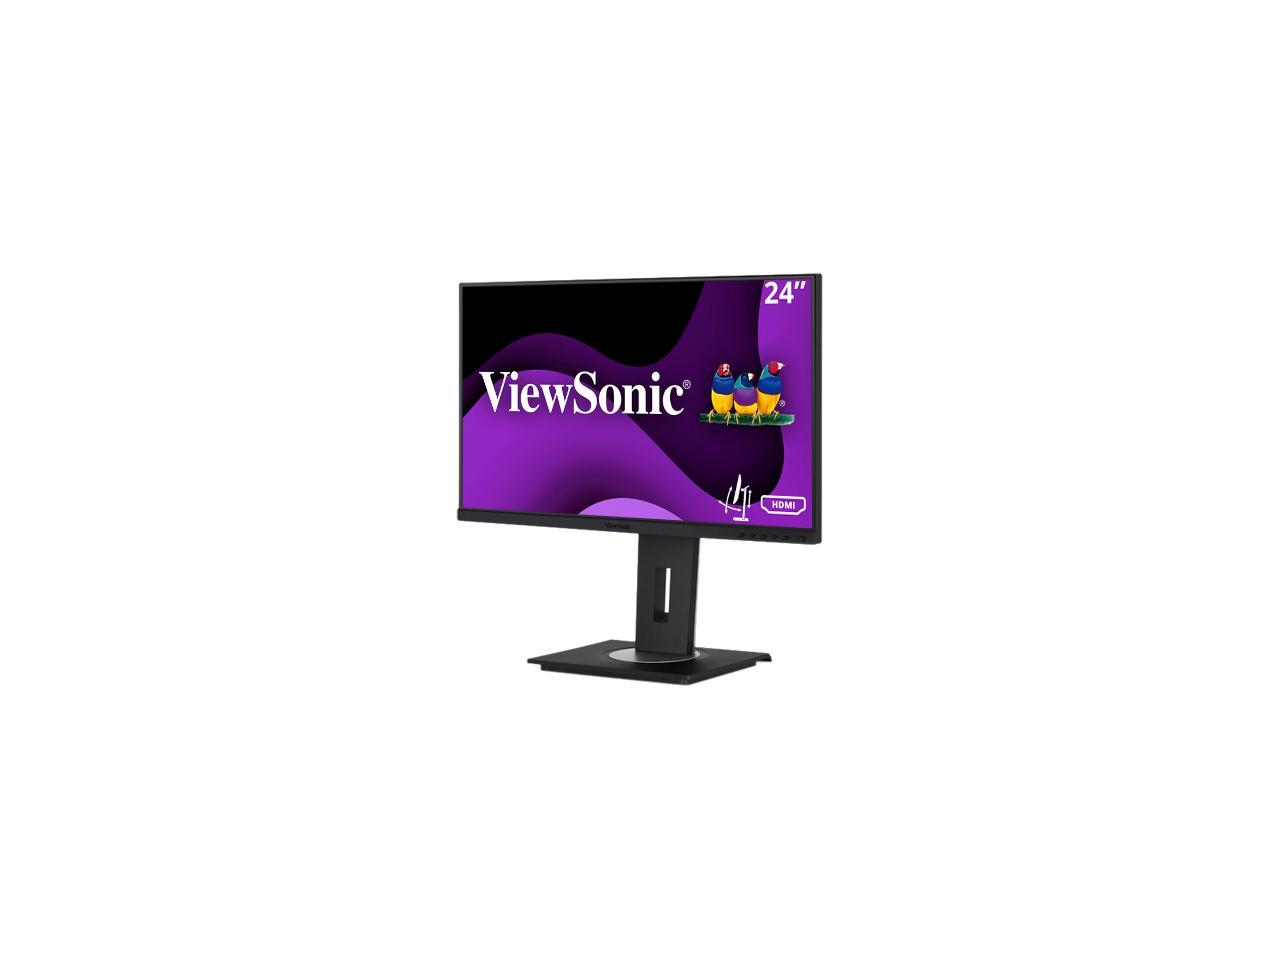 ViewSonic VG2448A 24 Inch IPS 1080p Ergonomic Monitor with Ultra-Thin Bezels, HDMI, DisplayPort, USB, VGA, and 40 Degree Tilt for Home and Office